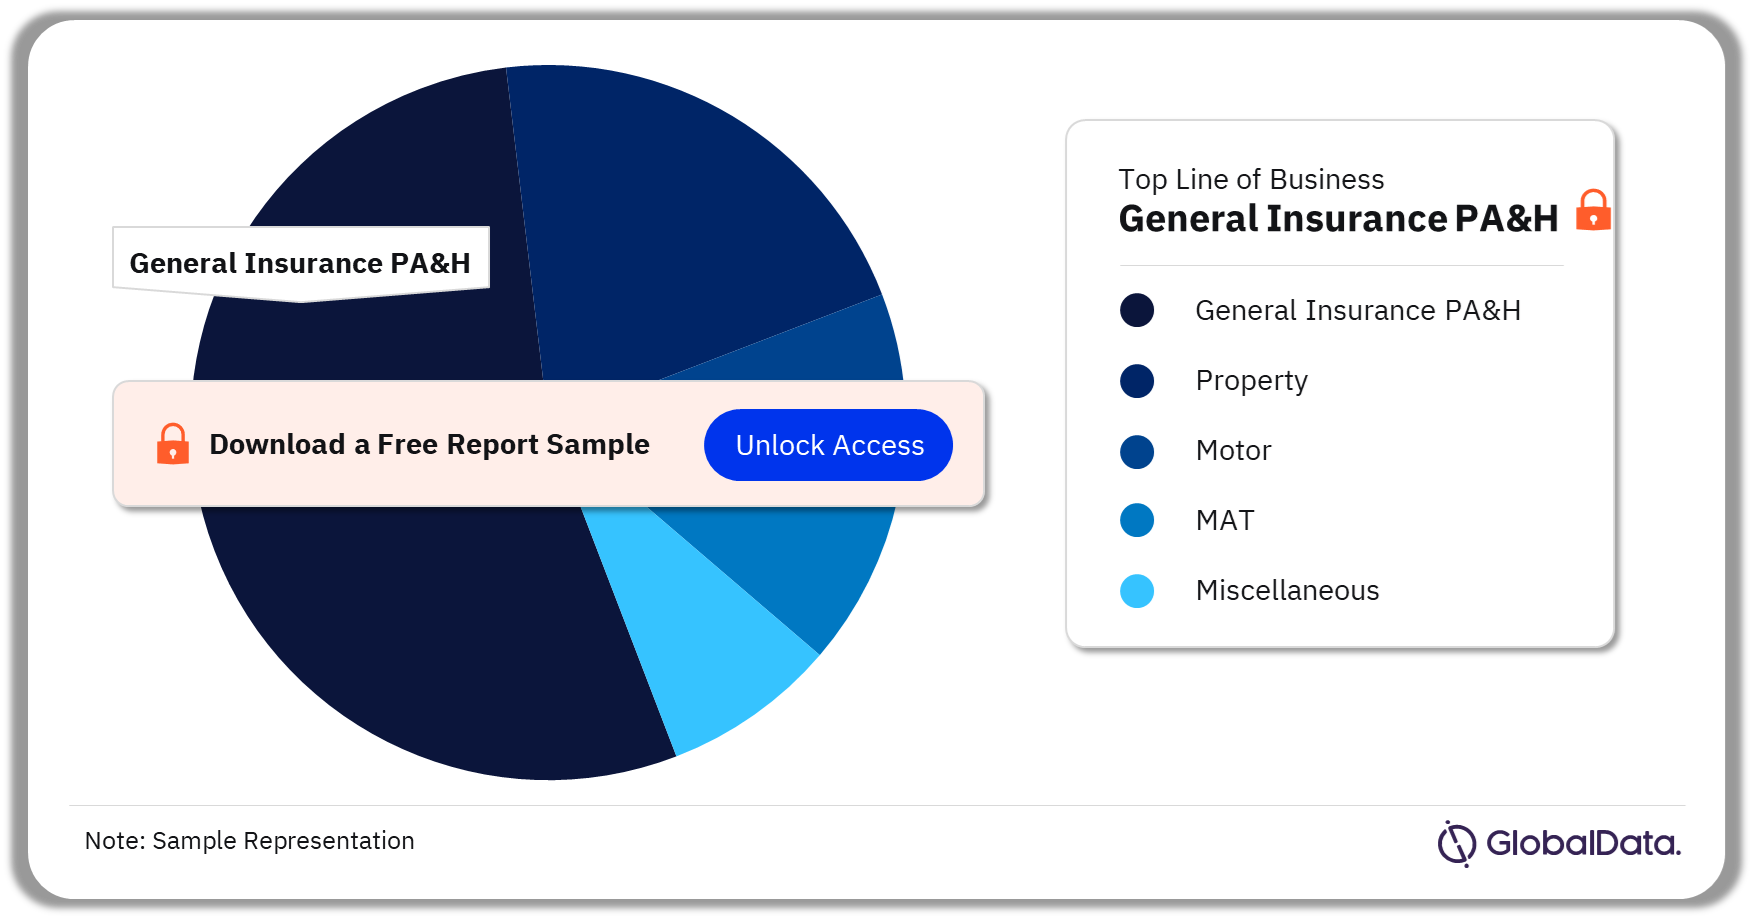 UAE General Insurance Market Analysis by Lines of Business, 2022 (%)